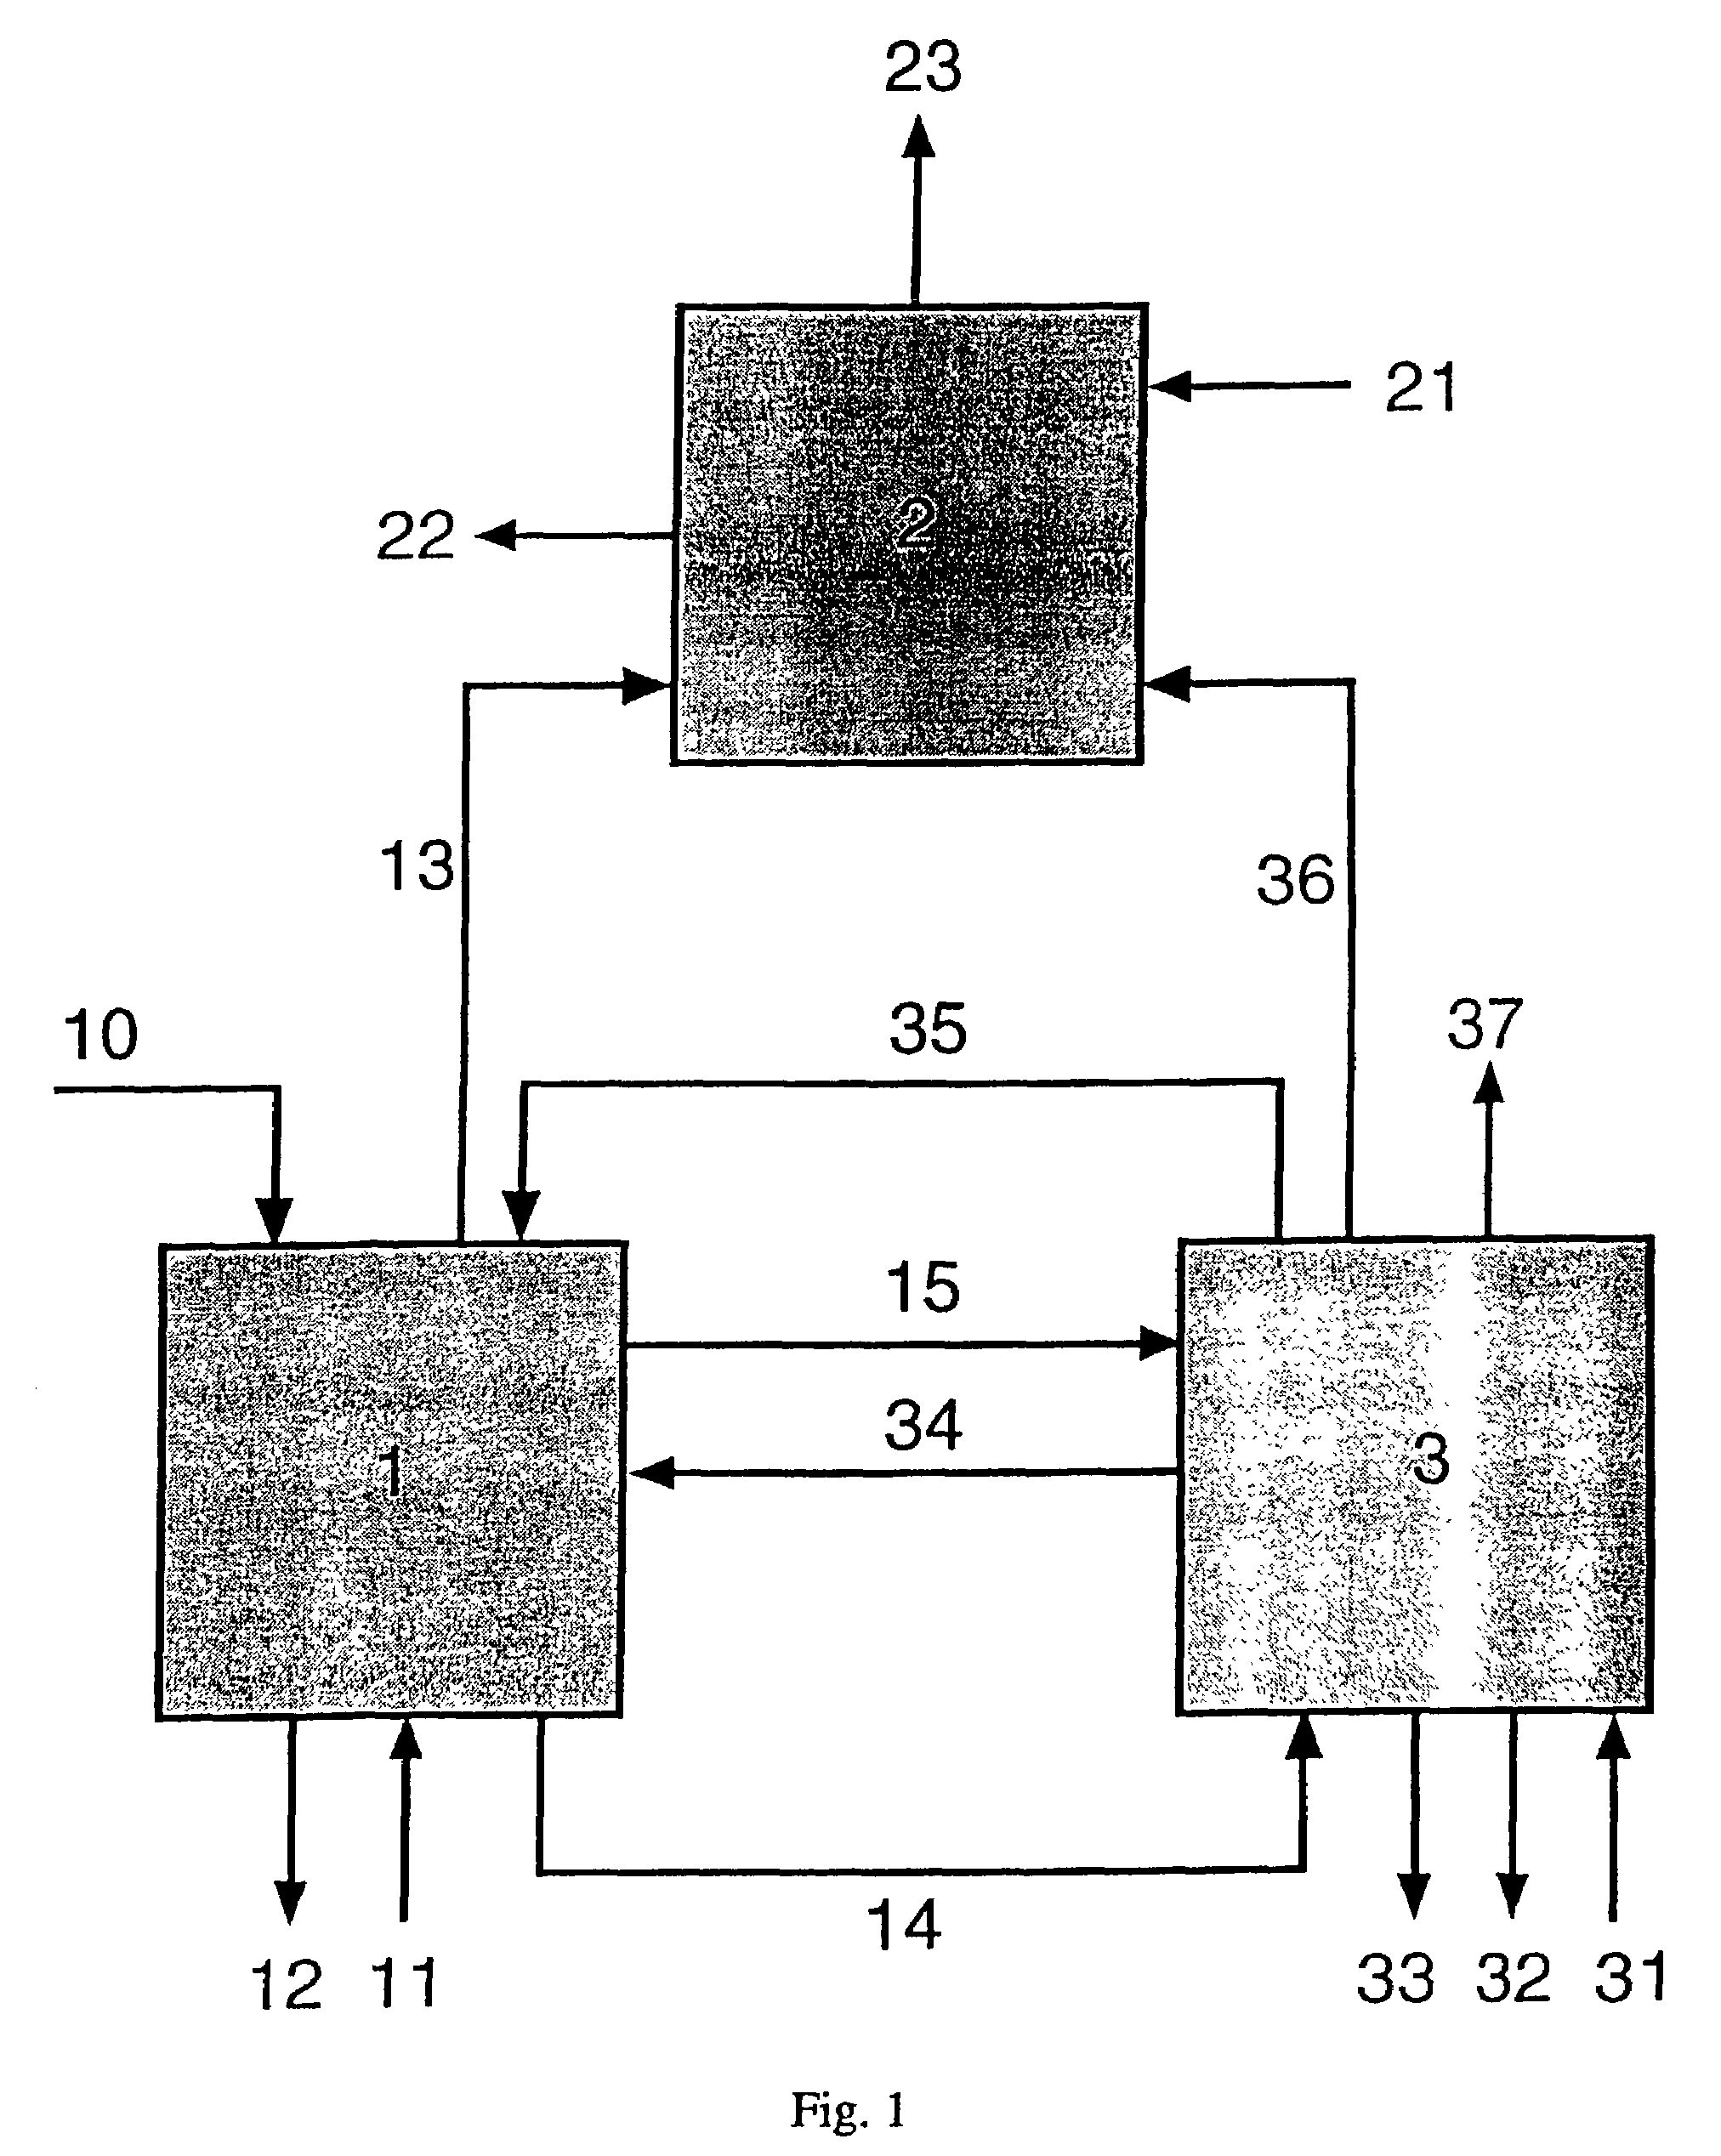 Method and device for pyrolyzing and gasifying organic substances or substance mixtures